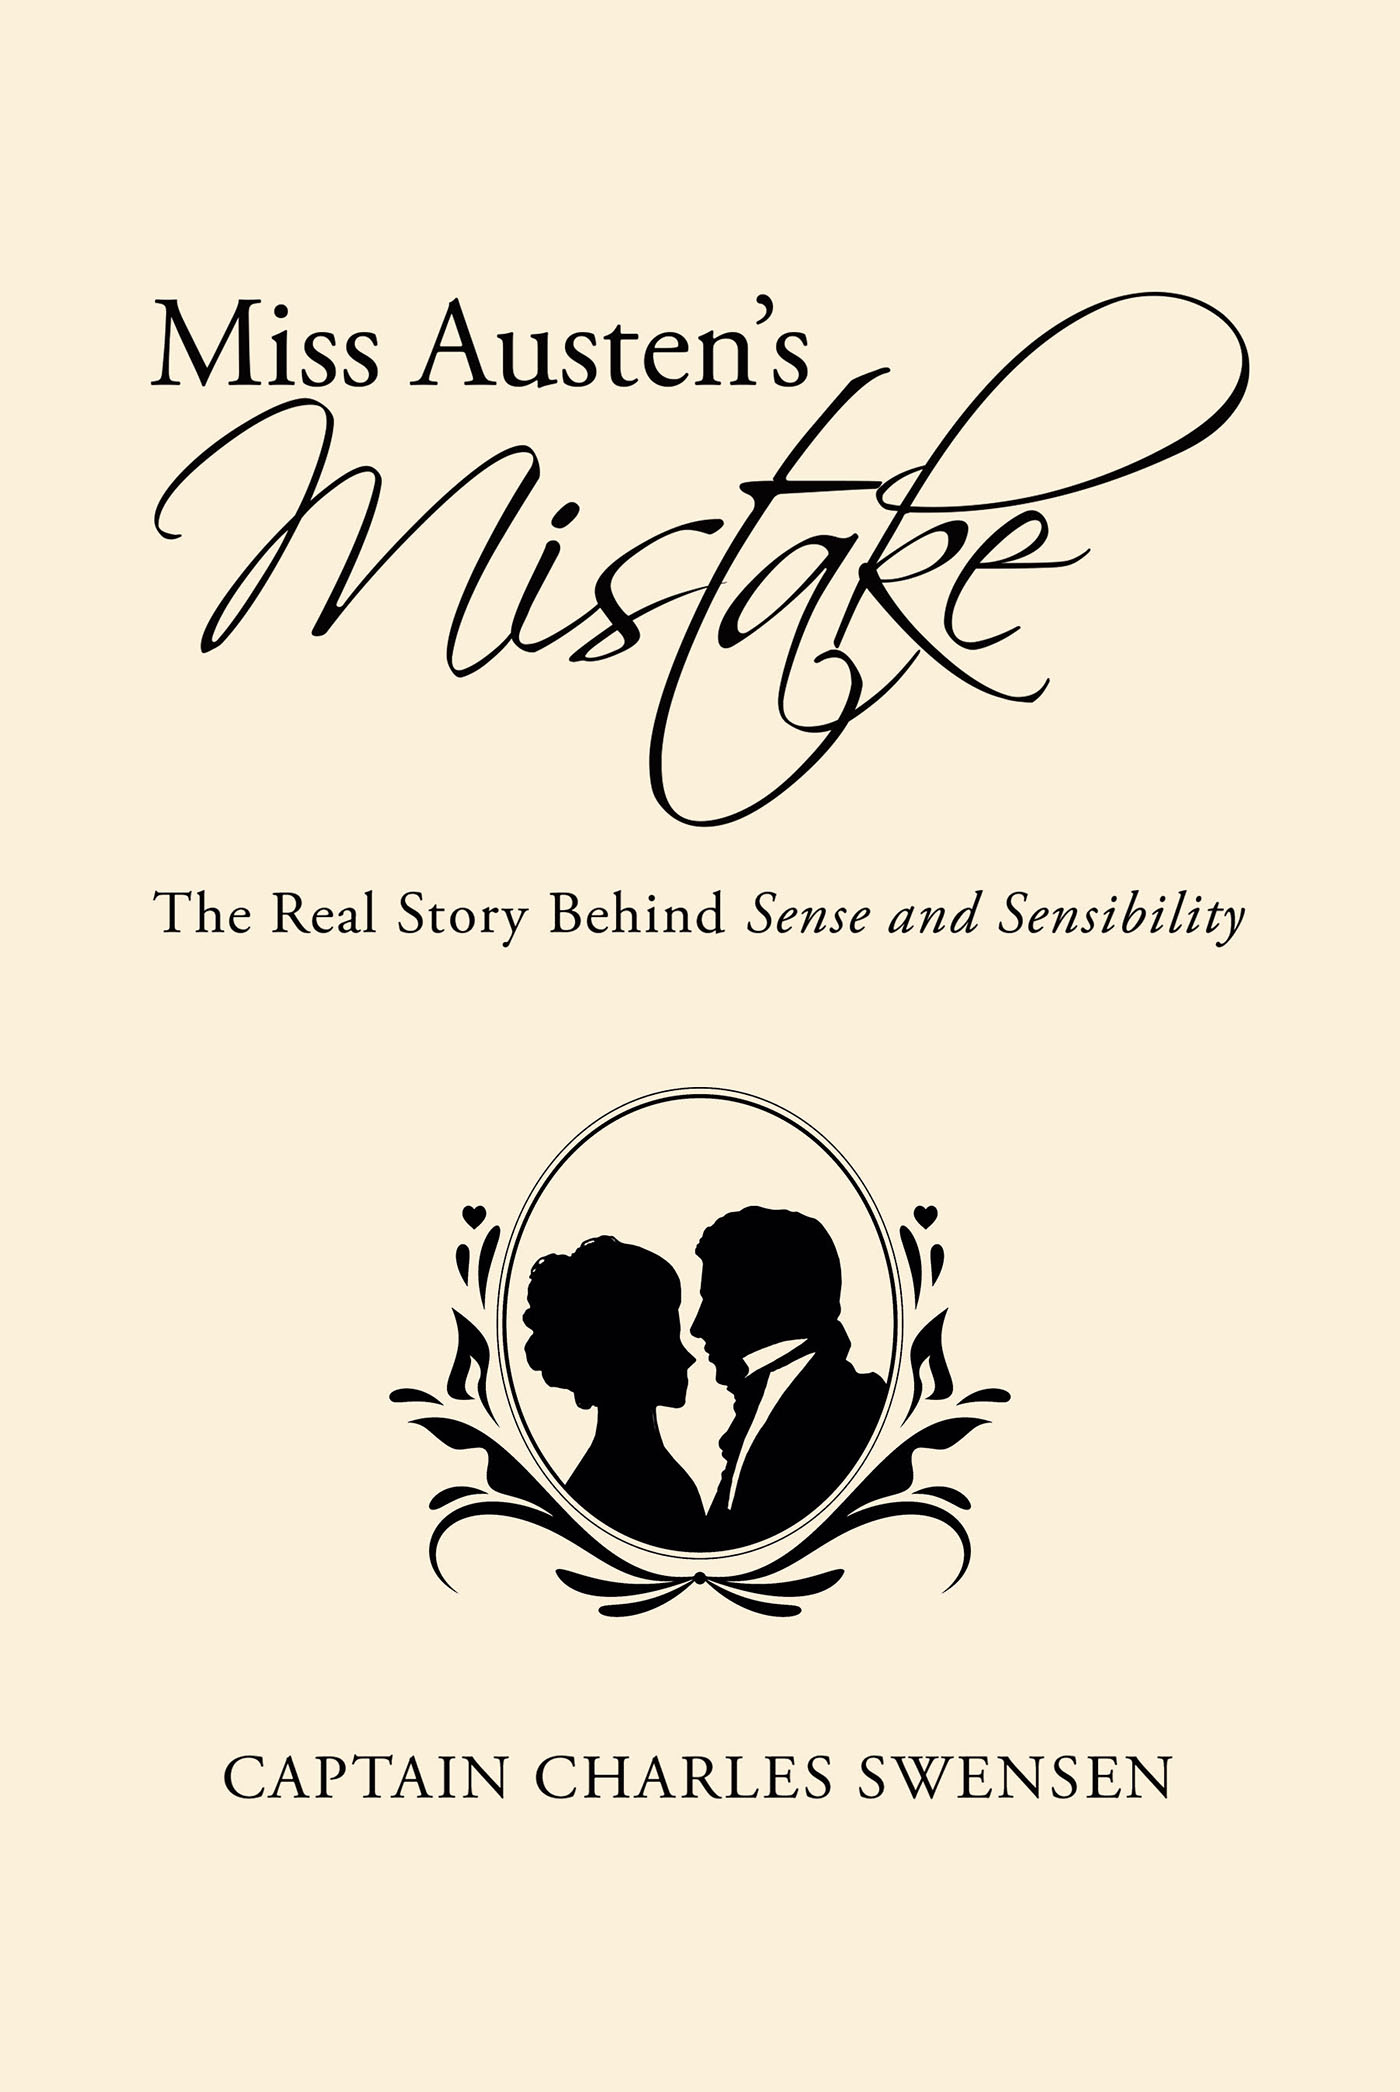 Captain Charles Swensen’s New Book, "Miss Austen's Mistake," Follows the "Real" Colonel Brandon as He Retells His Own Version of the Events of "Sense and Sensibility"